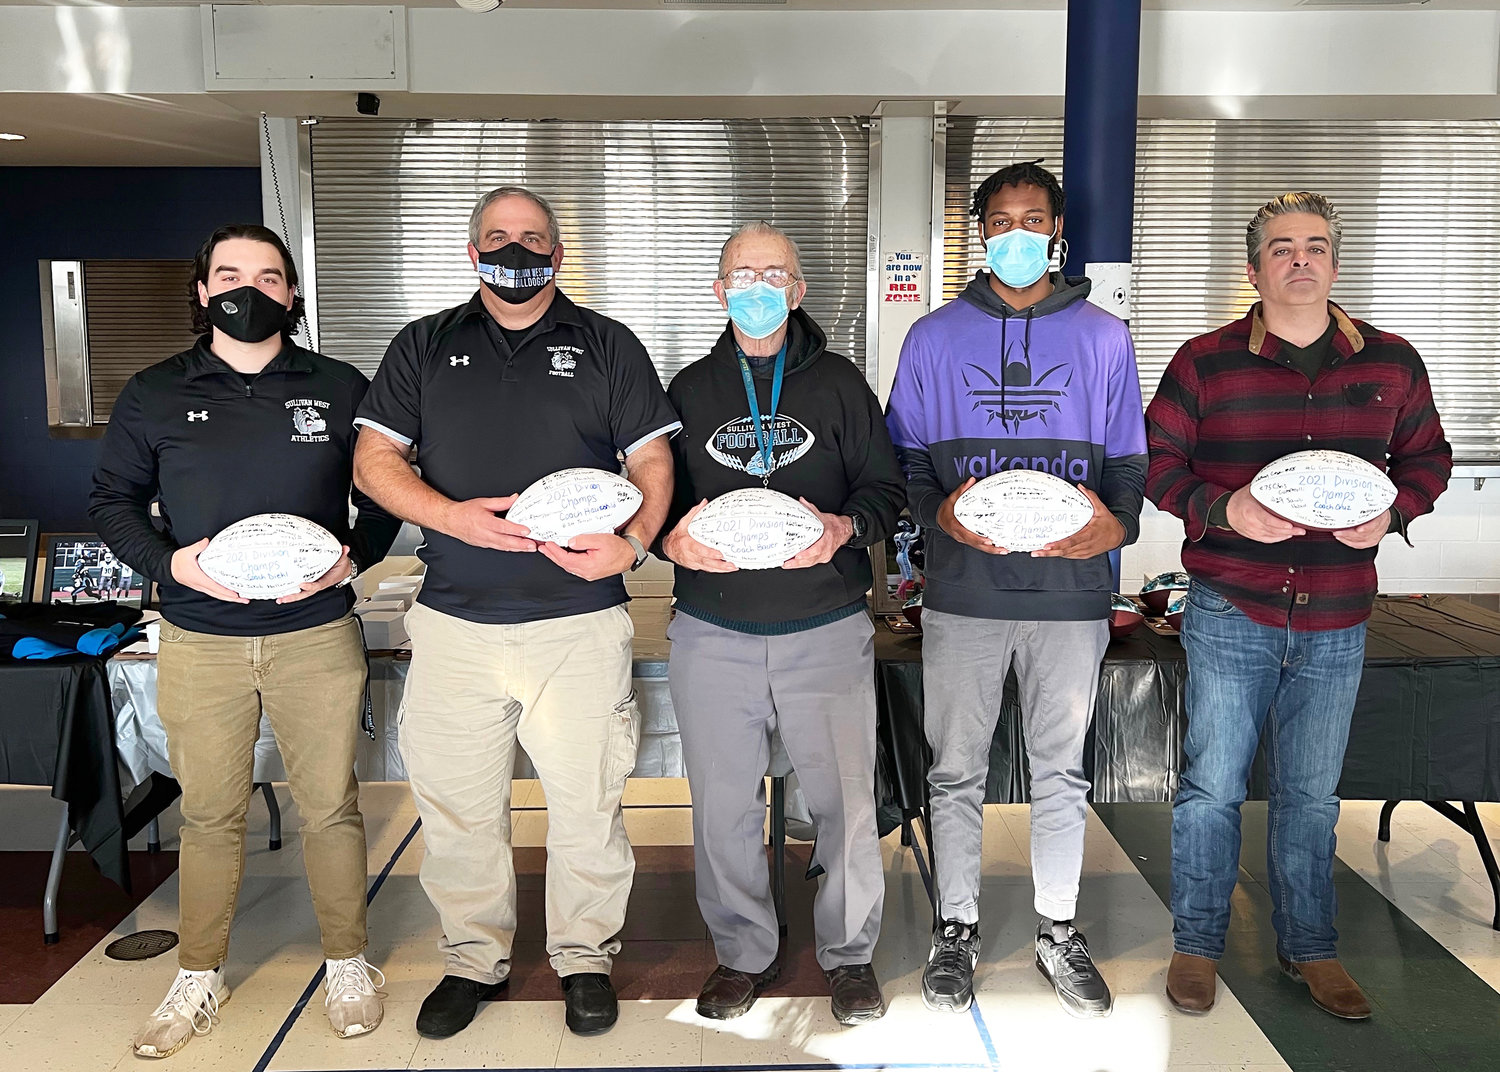 The coaching staff each received a football signed by all the players on the team. From left to right: Justin Diehl, John Hauschild, Ron Bauer, Ronj Padu and Shane Cruz.